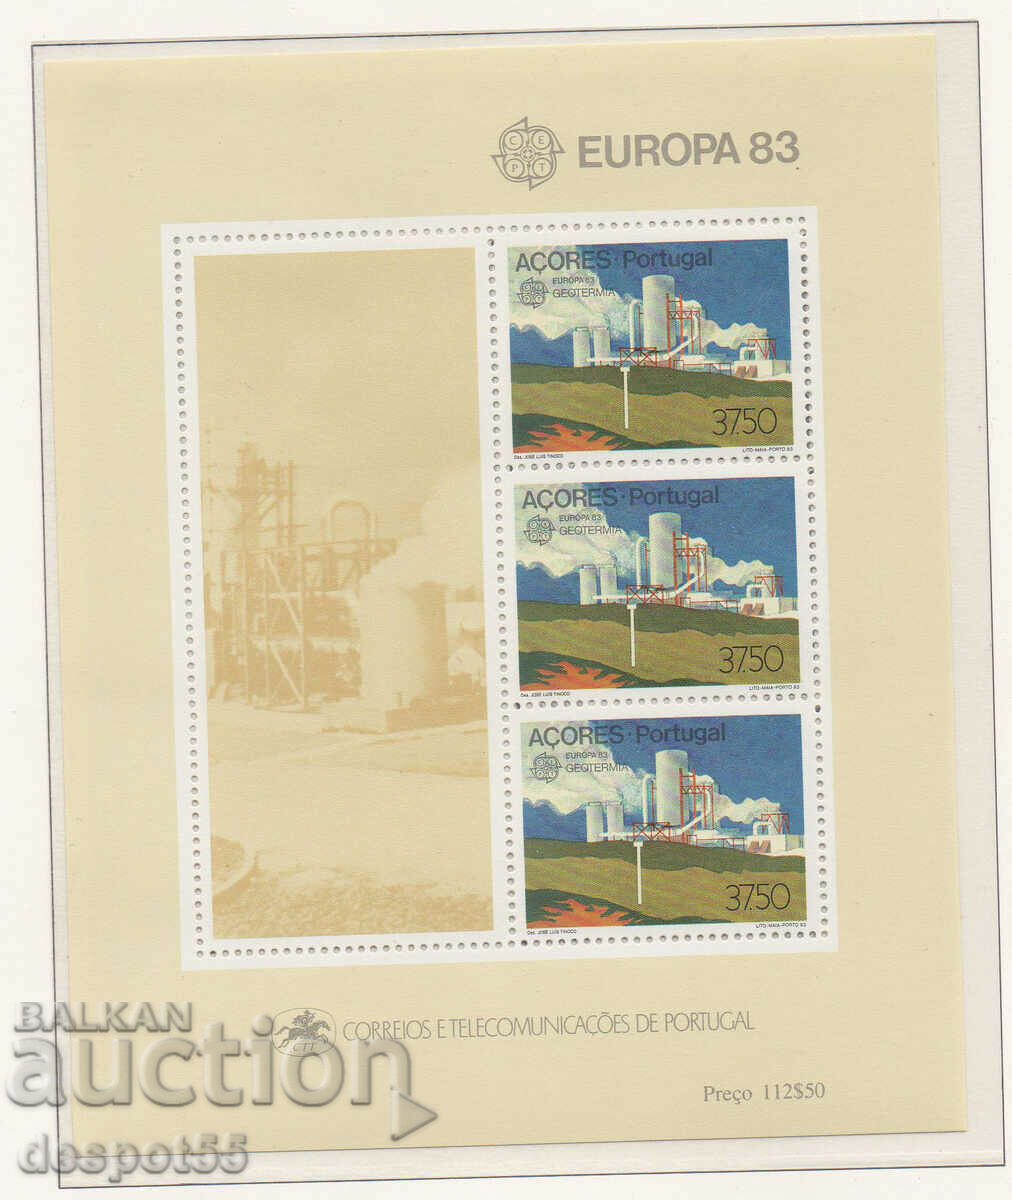 1983. Azores. Europe - Inventions. Block.